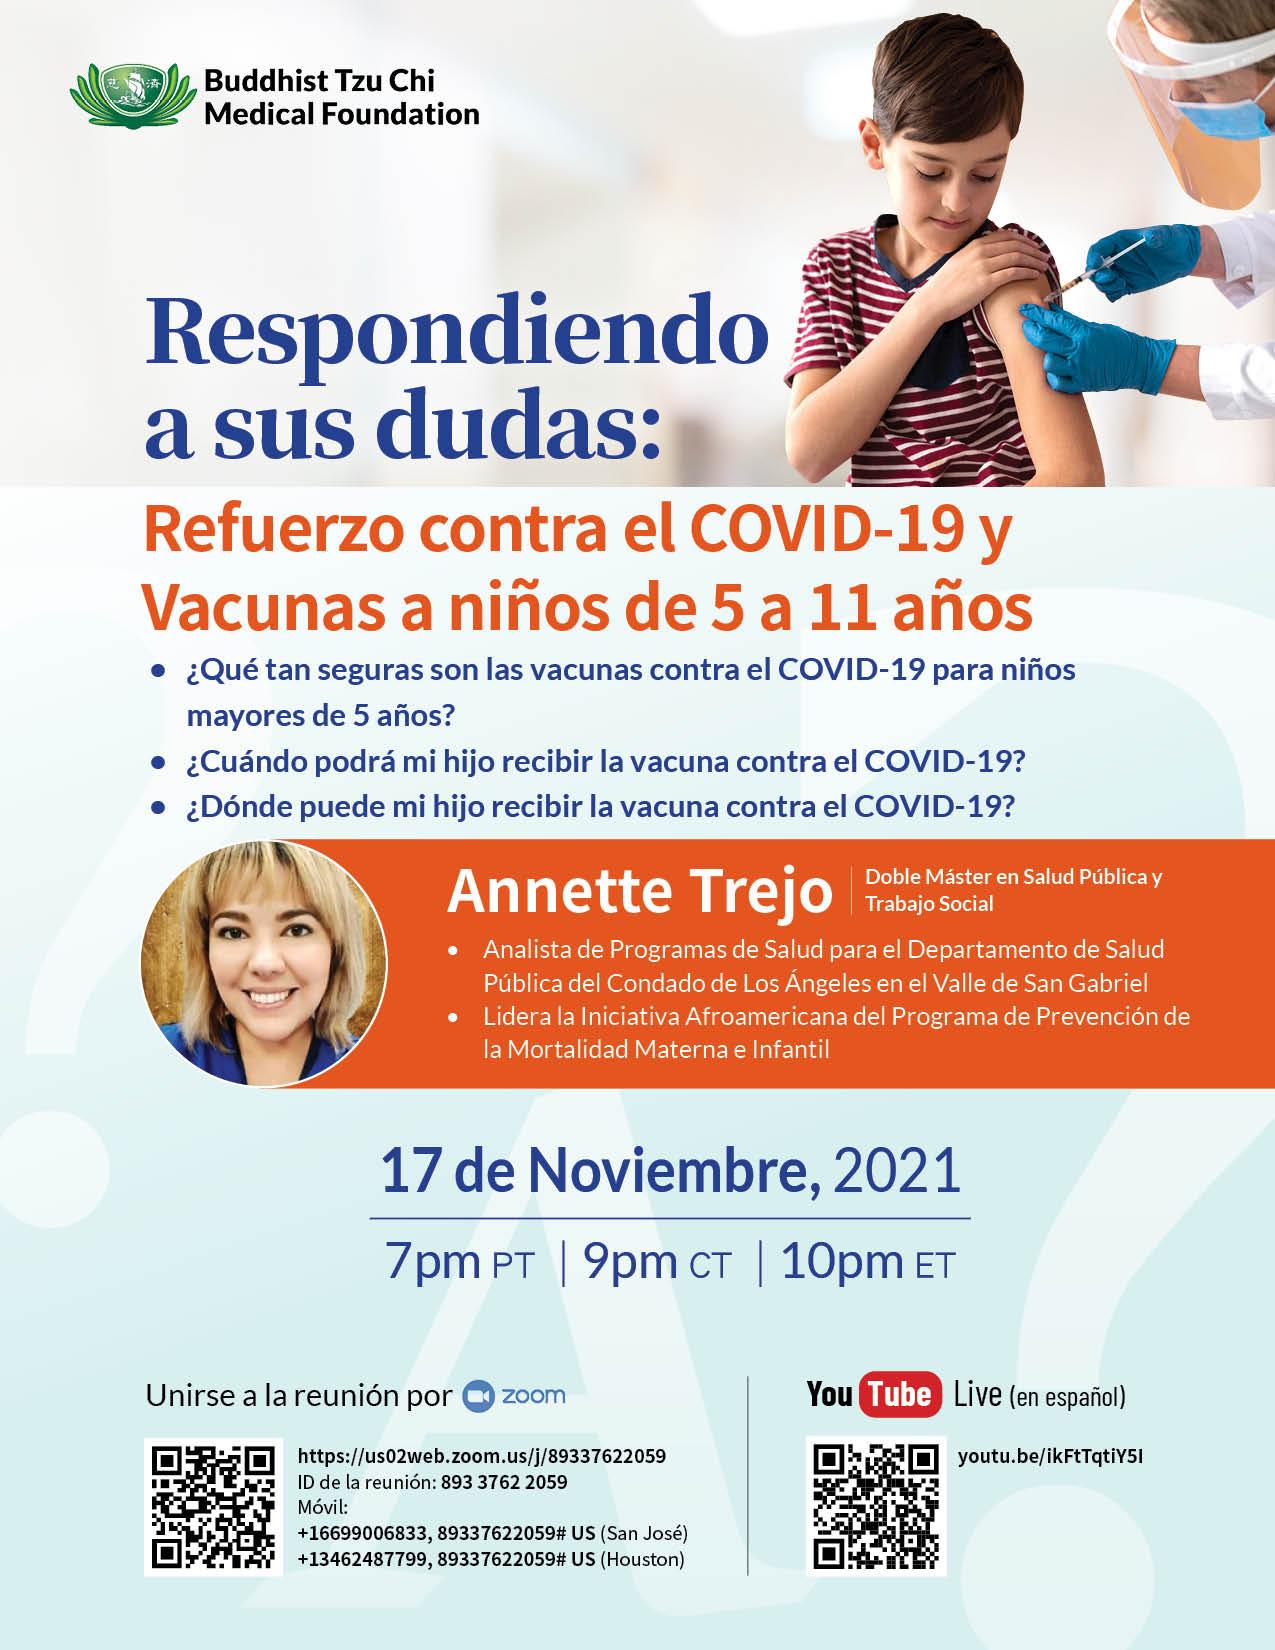 Flyer for Tzu Chi Medical Foundation's Spanish Virtual COVID-19 Vaccine Webinar on Wednesday, November 17 at 7pm